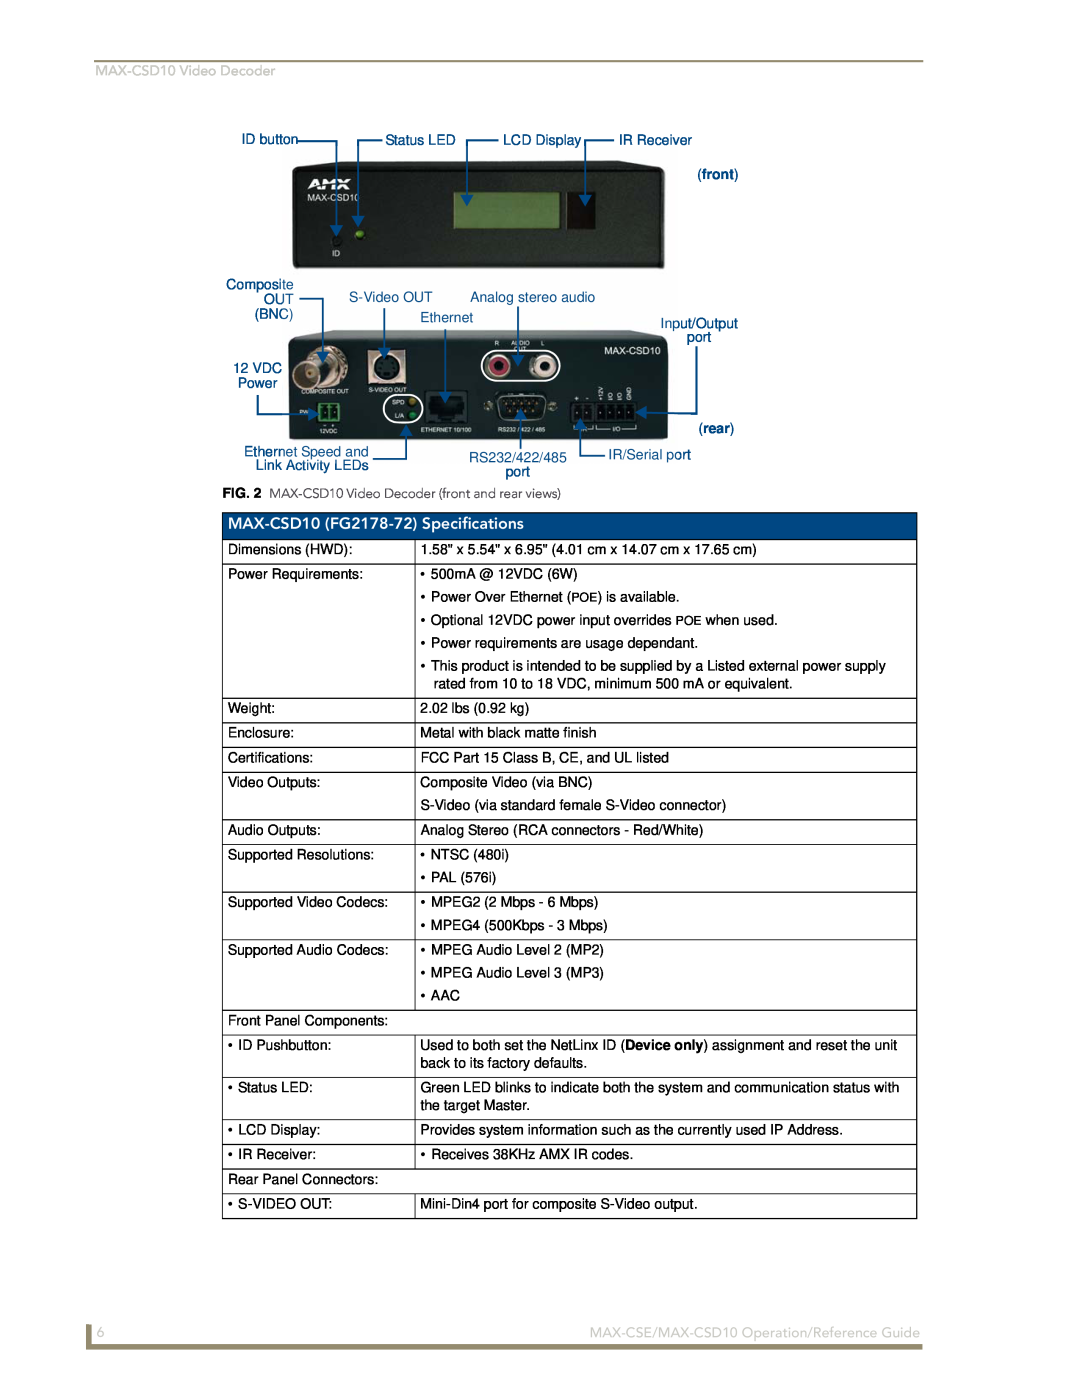 AMX MAX-CSE MAX-CSD10 FG2178-72Specifications, MAX-CSD10Video Decoder, ID button, Status LED, LCD Display, IR Receiver 